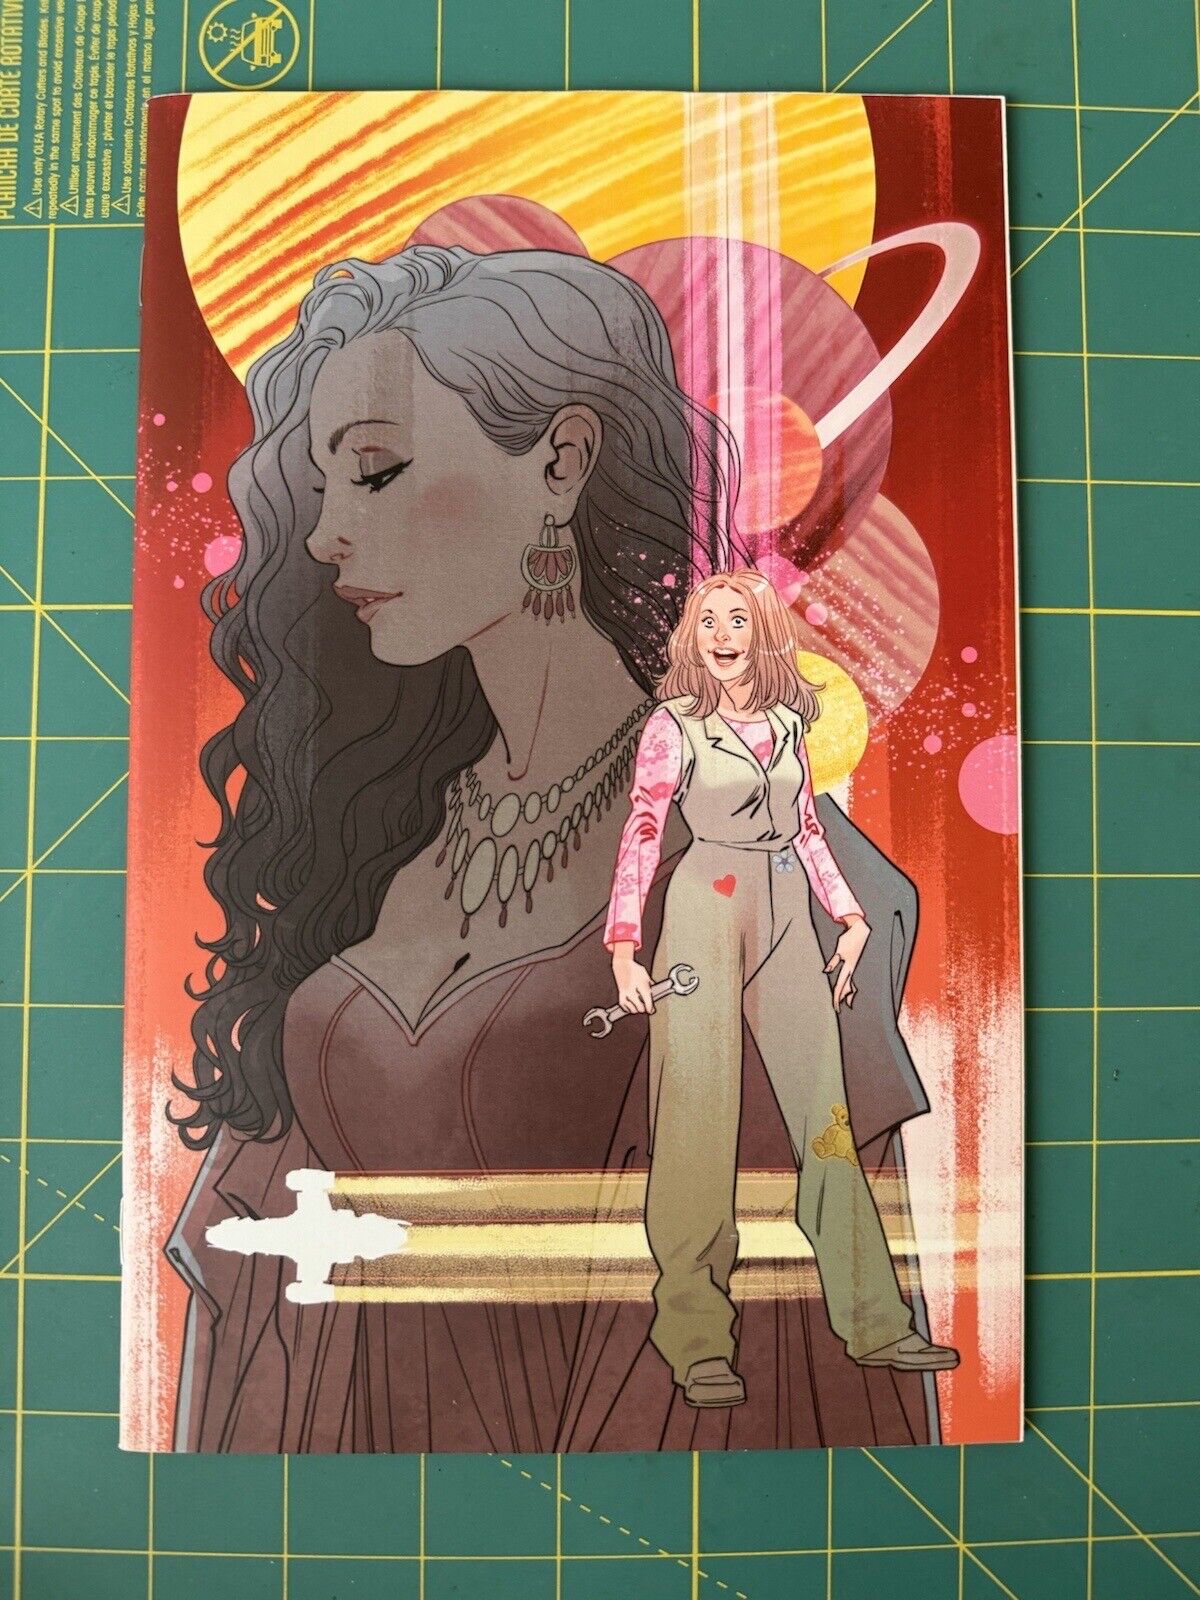 Firefly #3 - Jan 2019 - 1:15 Incentive Variant - BOOM Studios - (228A)